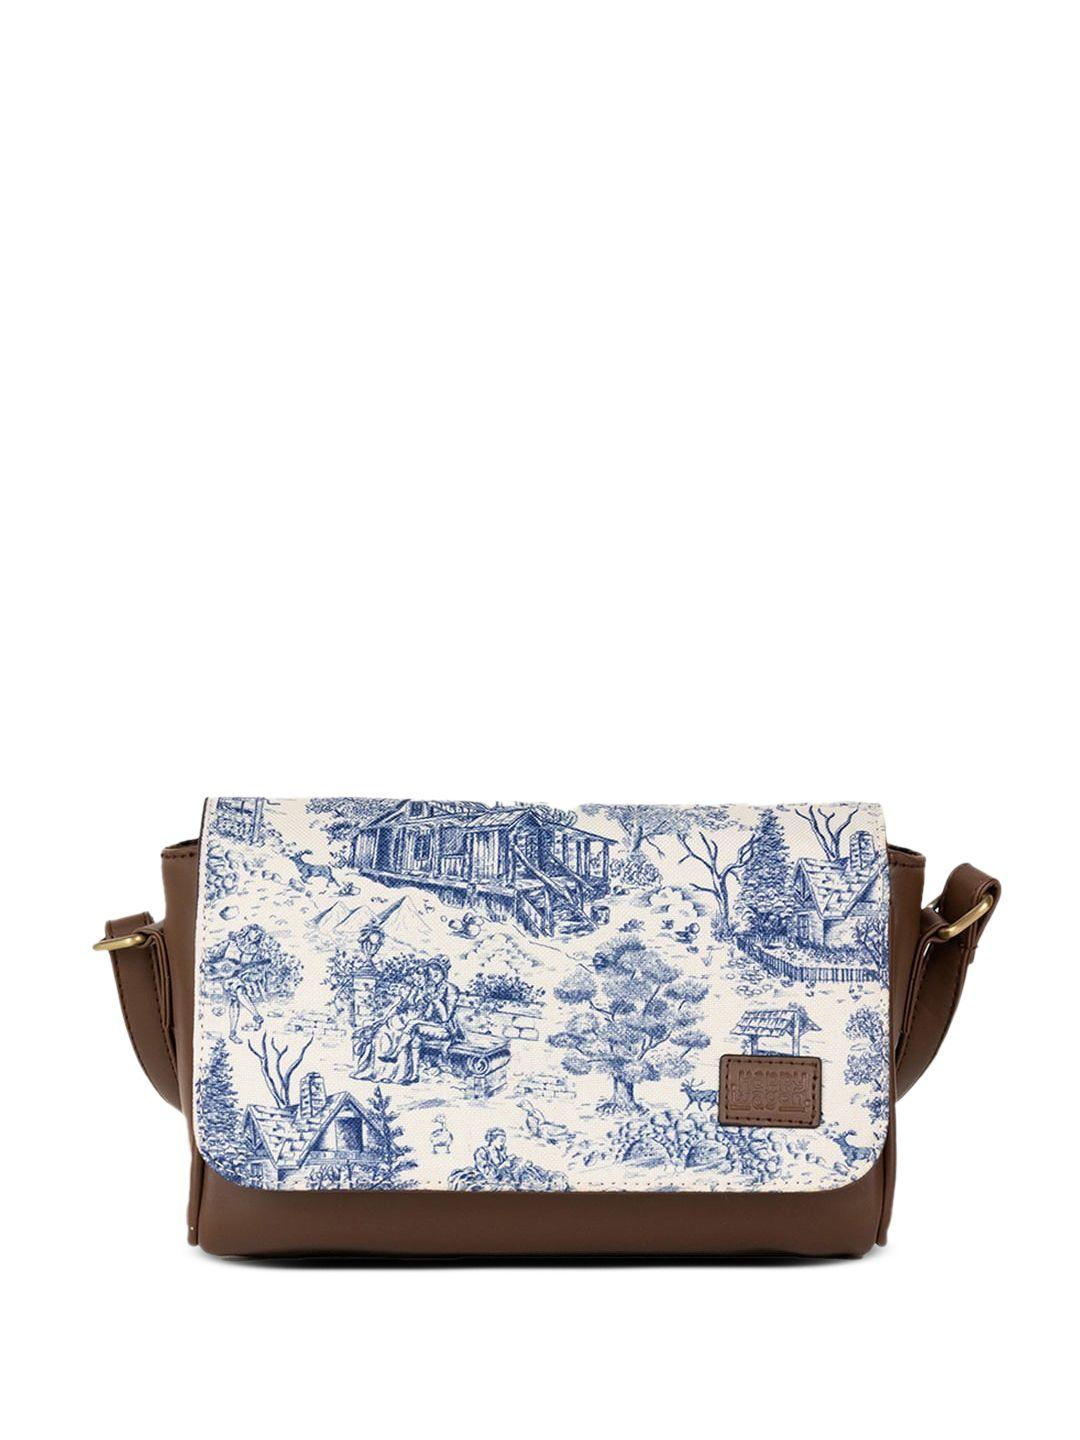 happywagon graphic printed leather structured sling bag